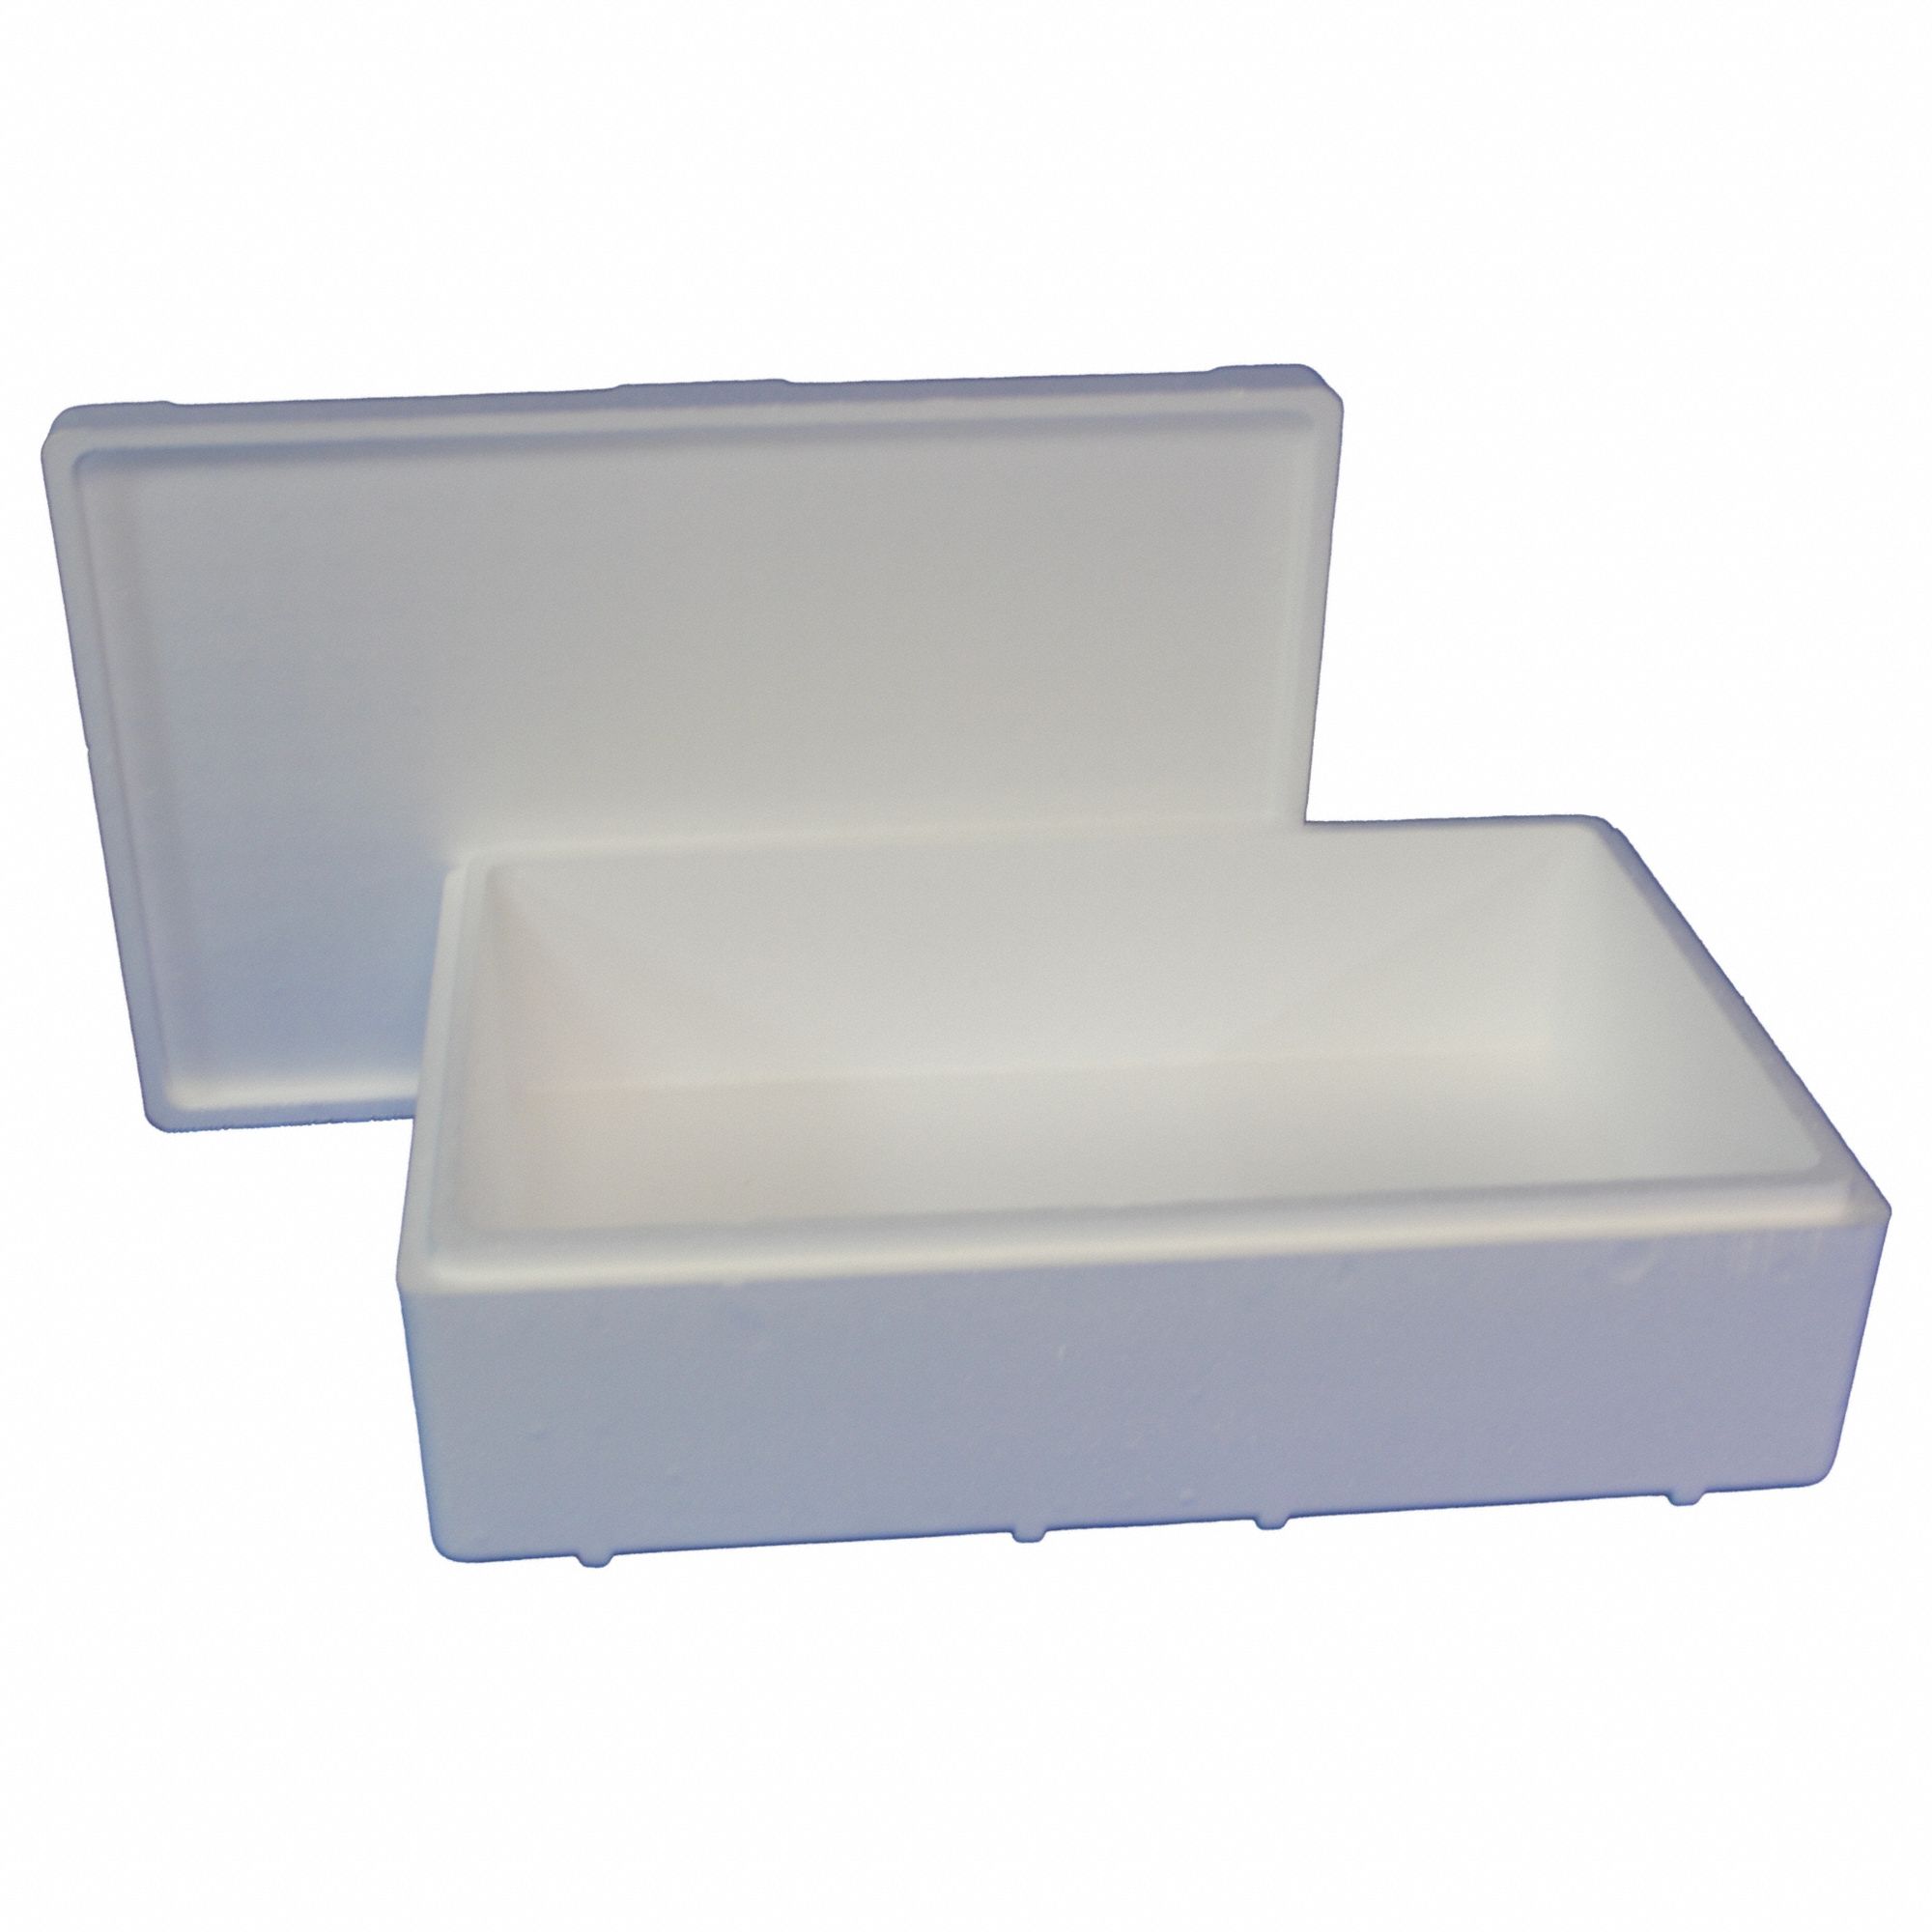 Polar Tech Thermo Chill Overnite Insulated Food Pan Shipping Box with Foam  Container ON55C 20 x 12 x 5